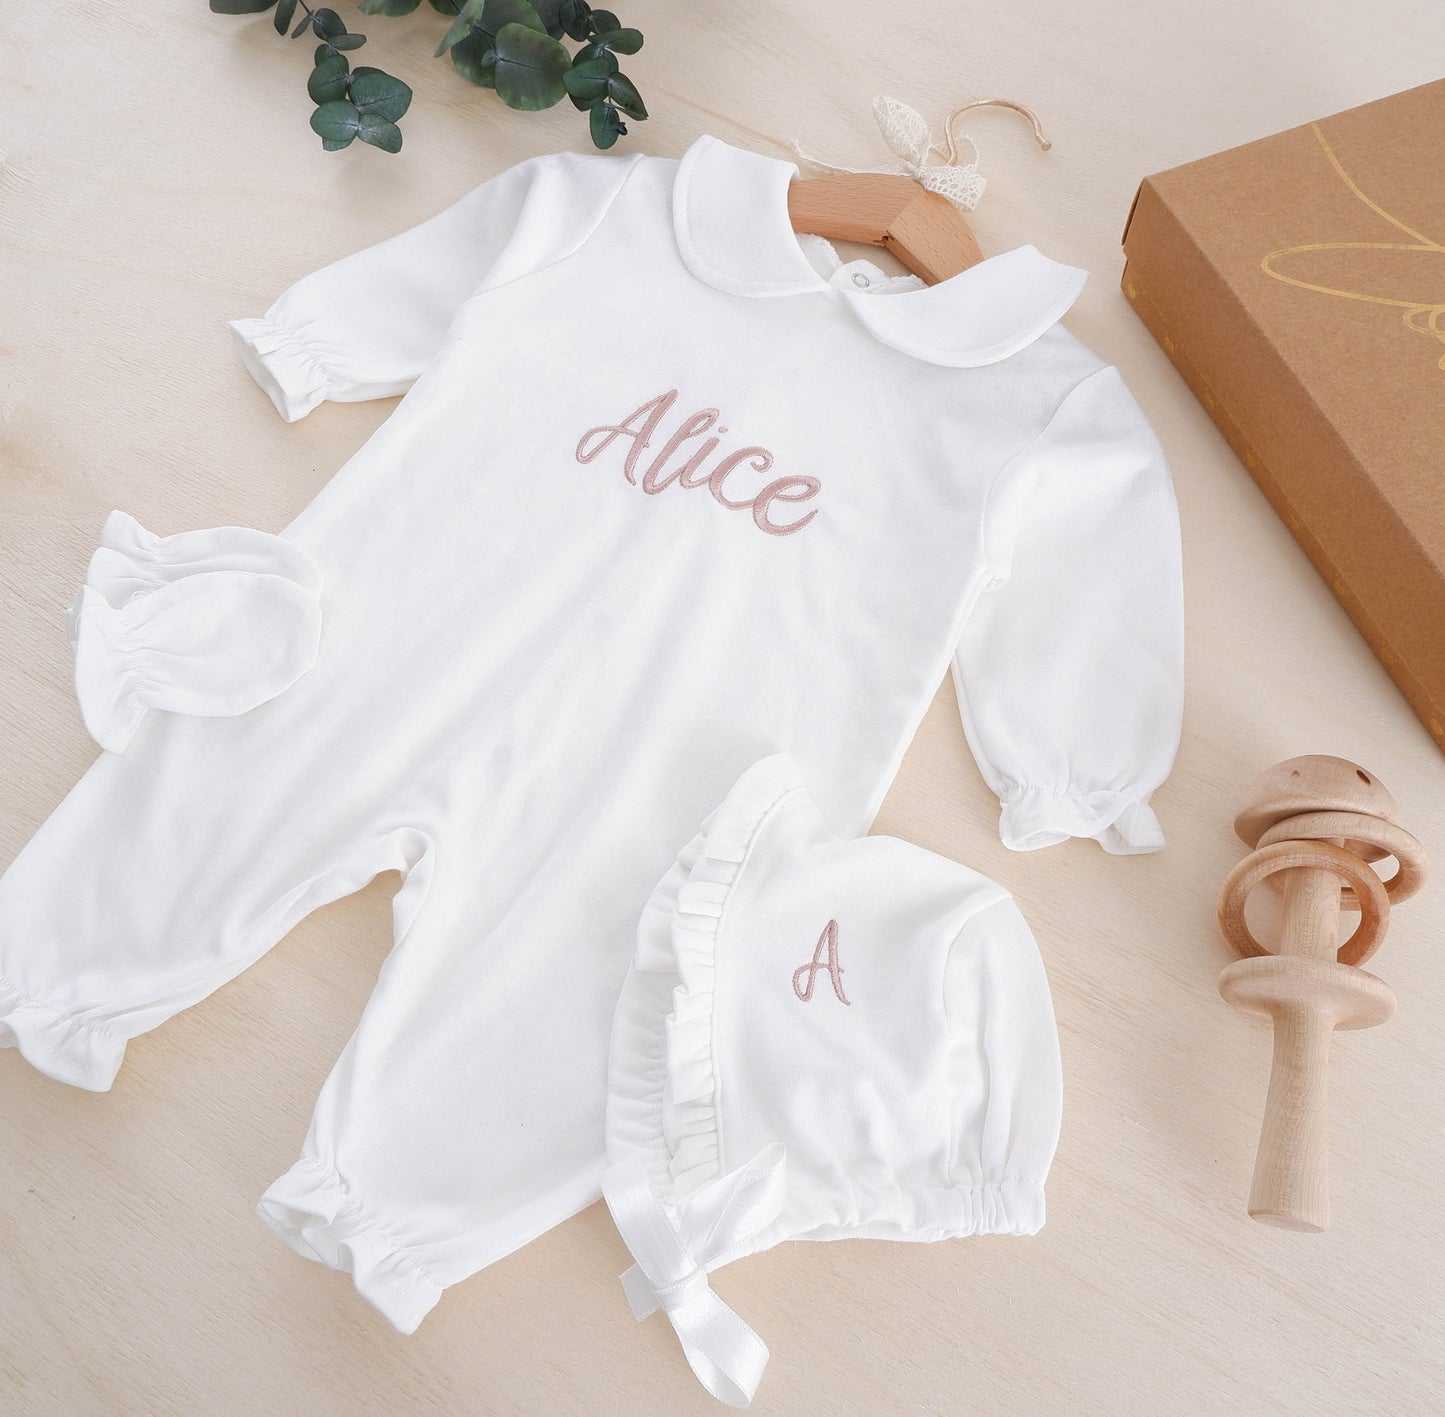 Personalized Coming Home Outfit, Customized Baby Girl Hospital Outfit, Newborn Girl Coming Home Outfit, Personalized Gift for Newborn